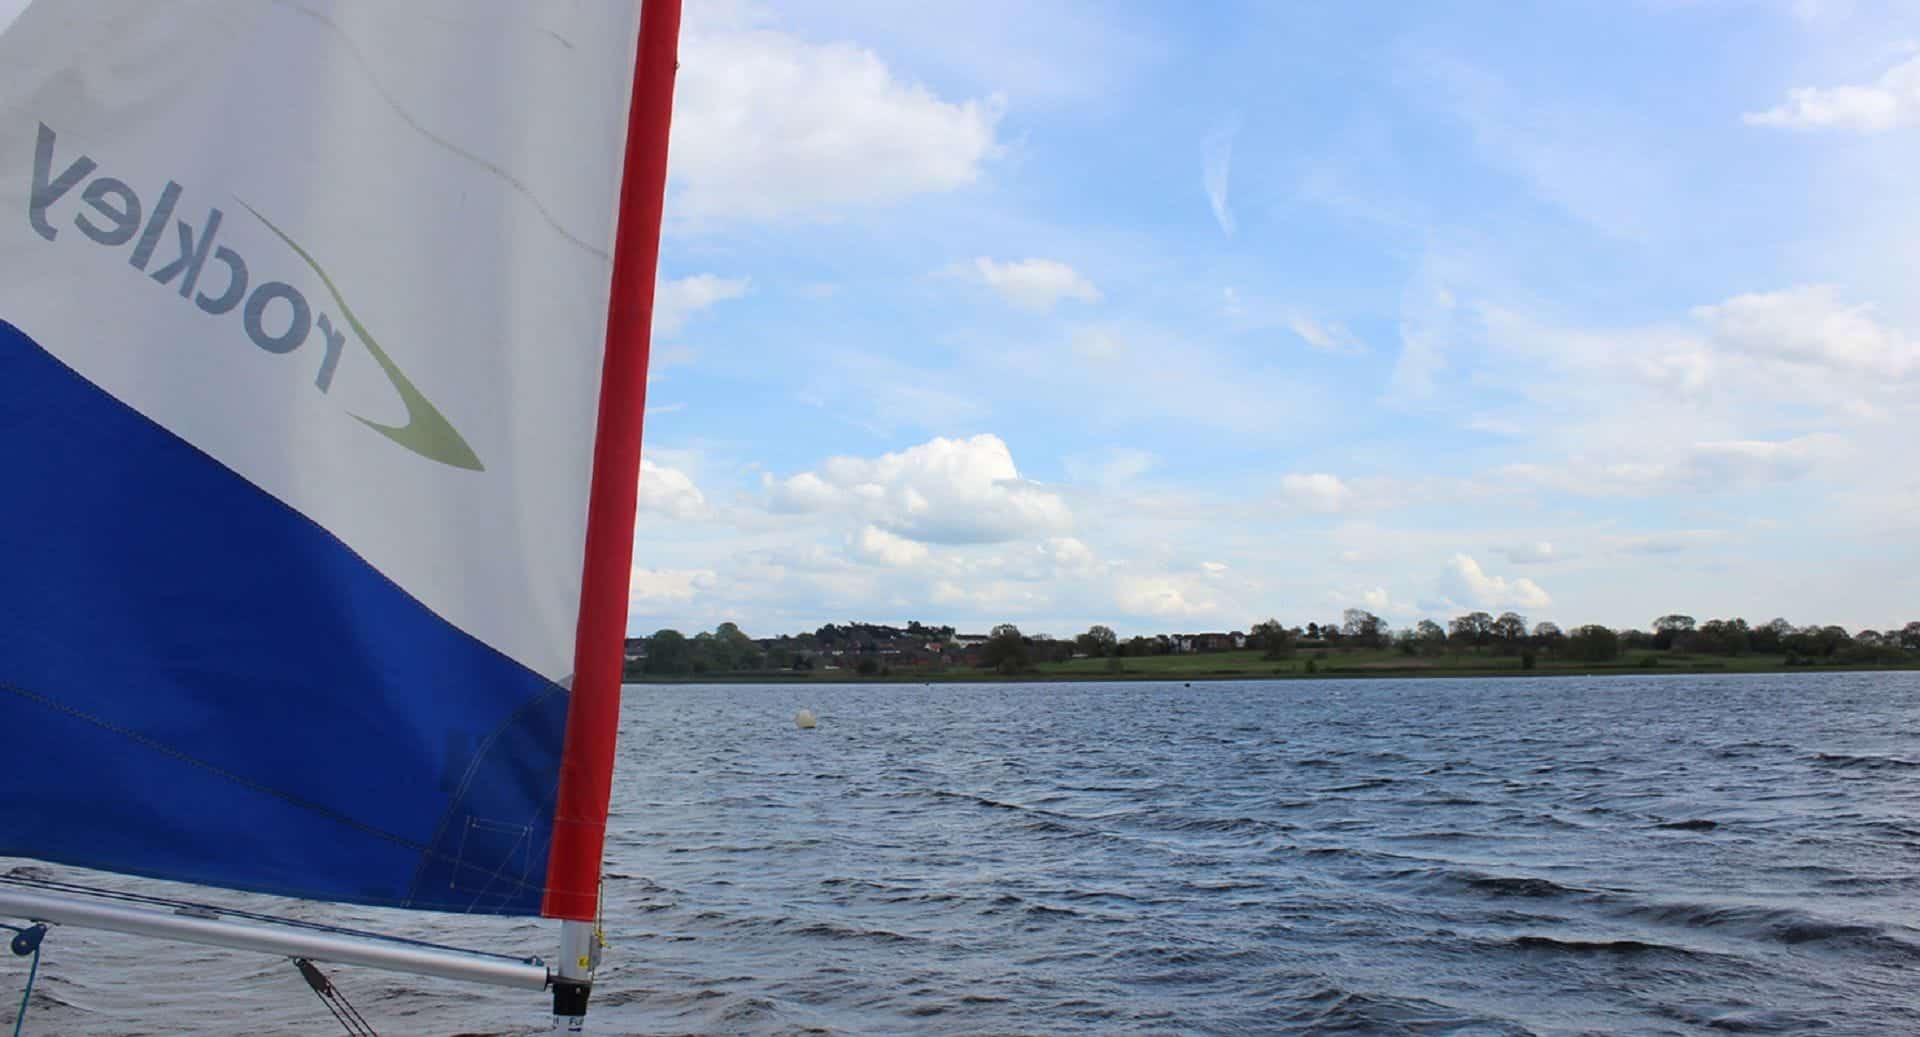 Bartley Sailing Club / Rockley Water Sports in UK